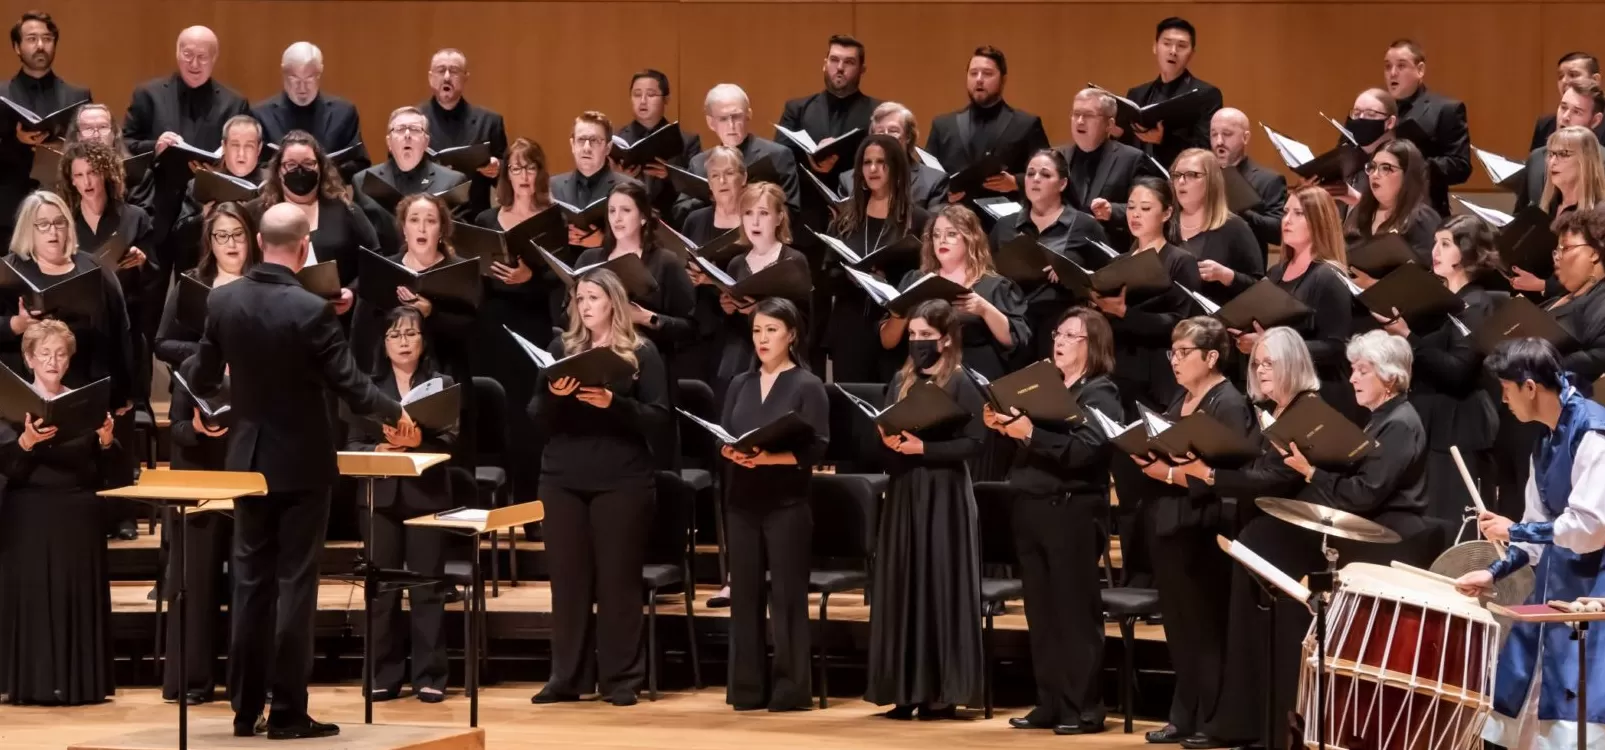 LA Opus Review of Pacific Chorale’s 2021 Opening Night Concert